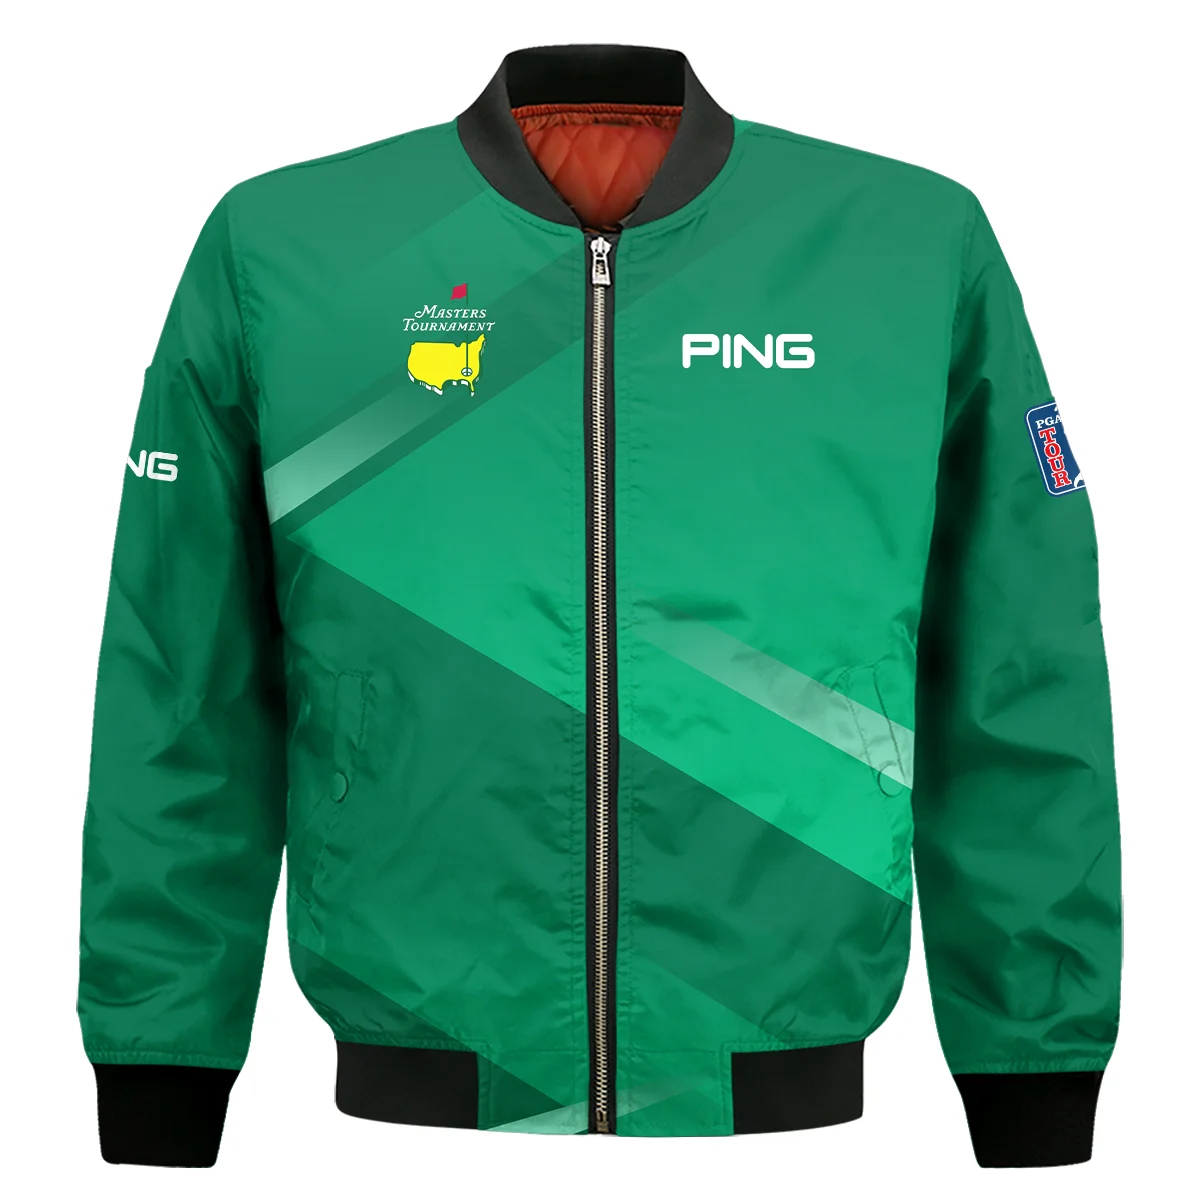 Ping Masters Tournament Golf Bomber Jacket Green Gradient Pattern Sports Bomber Jacket GBJ1373